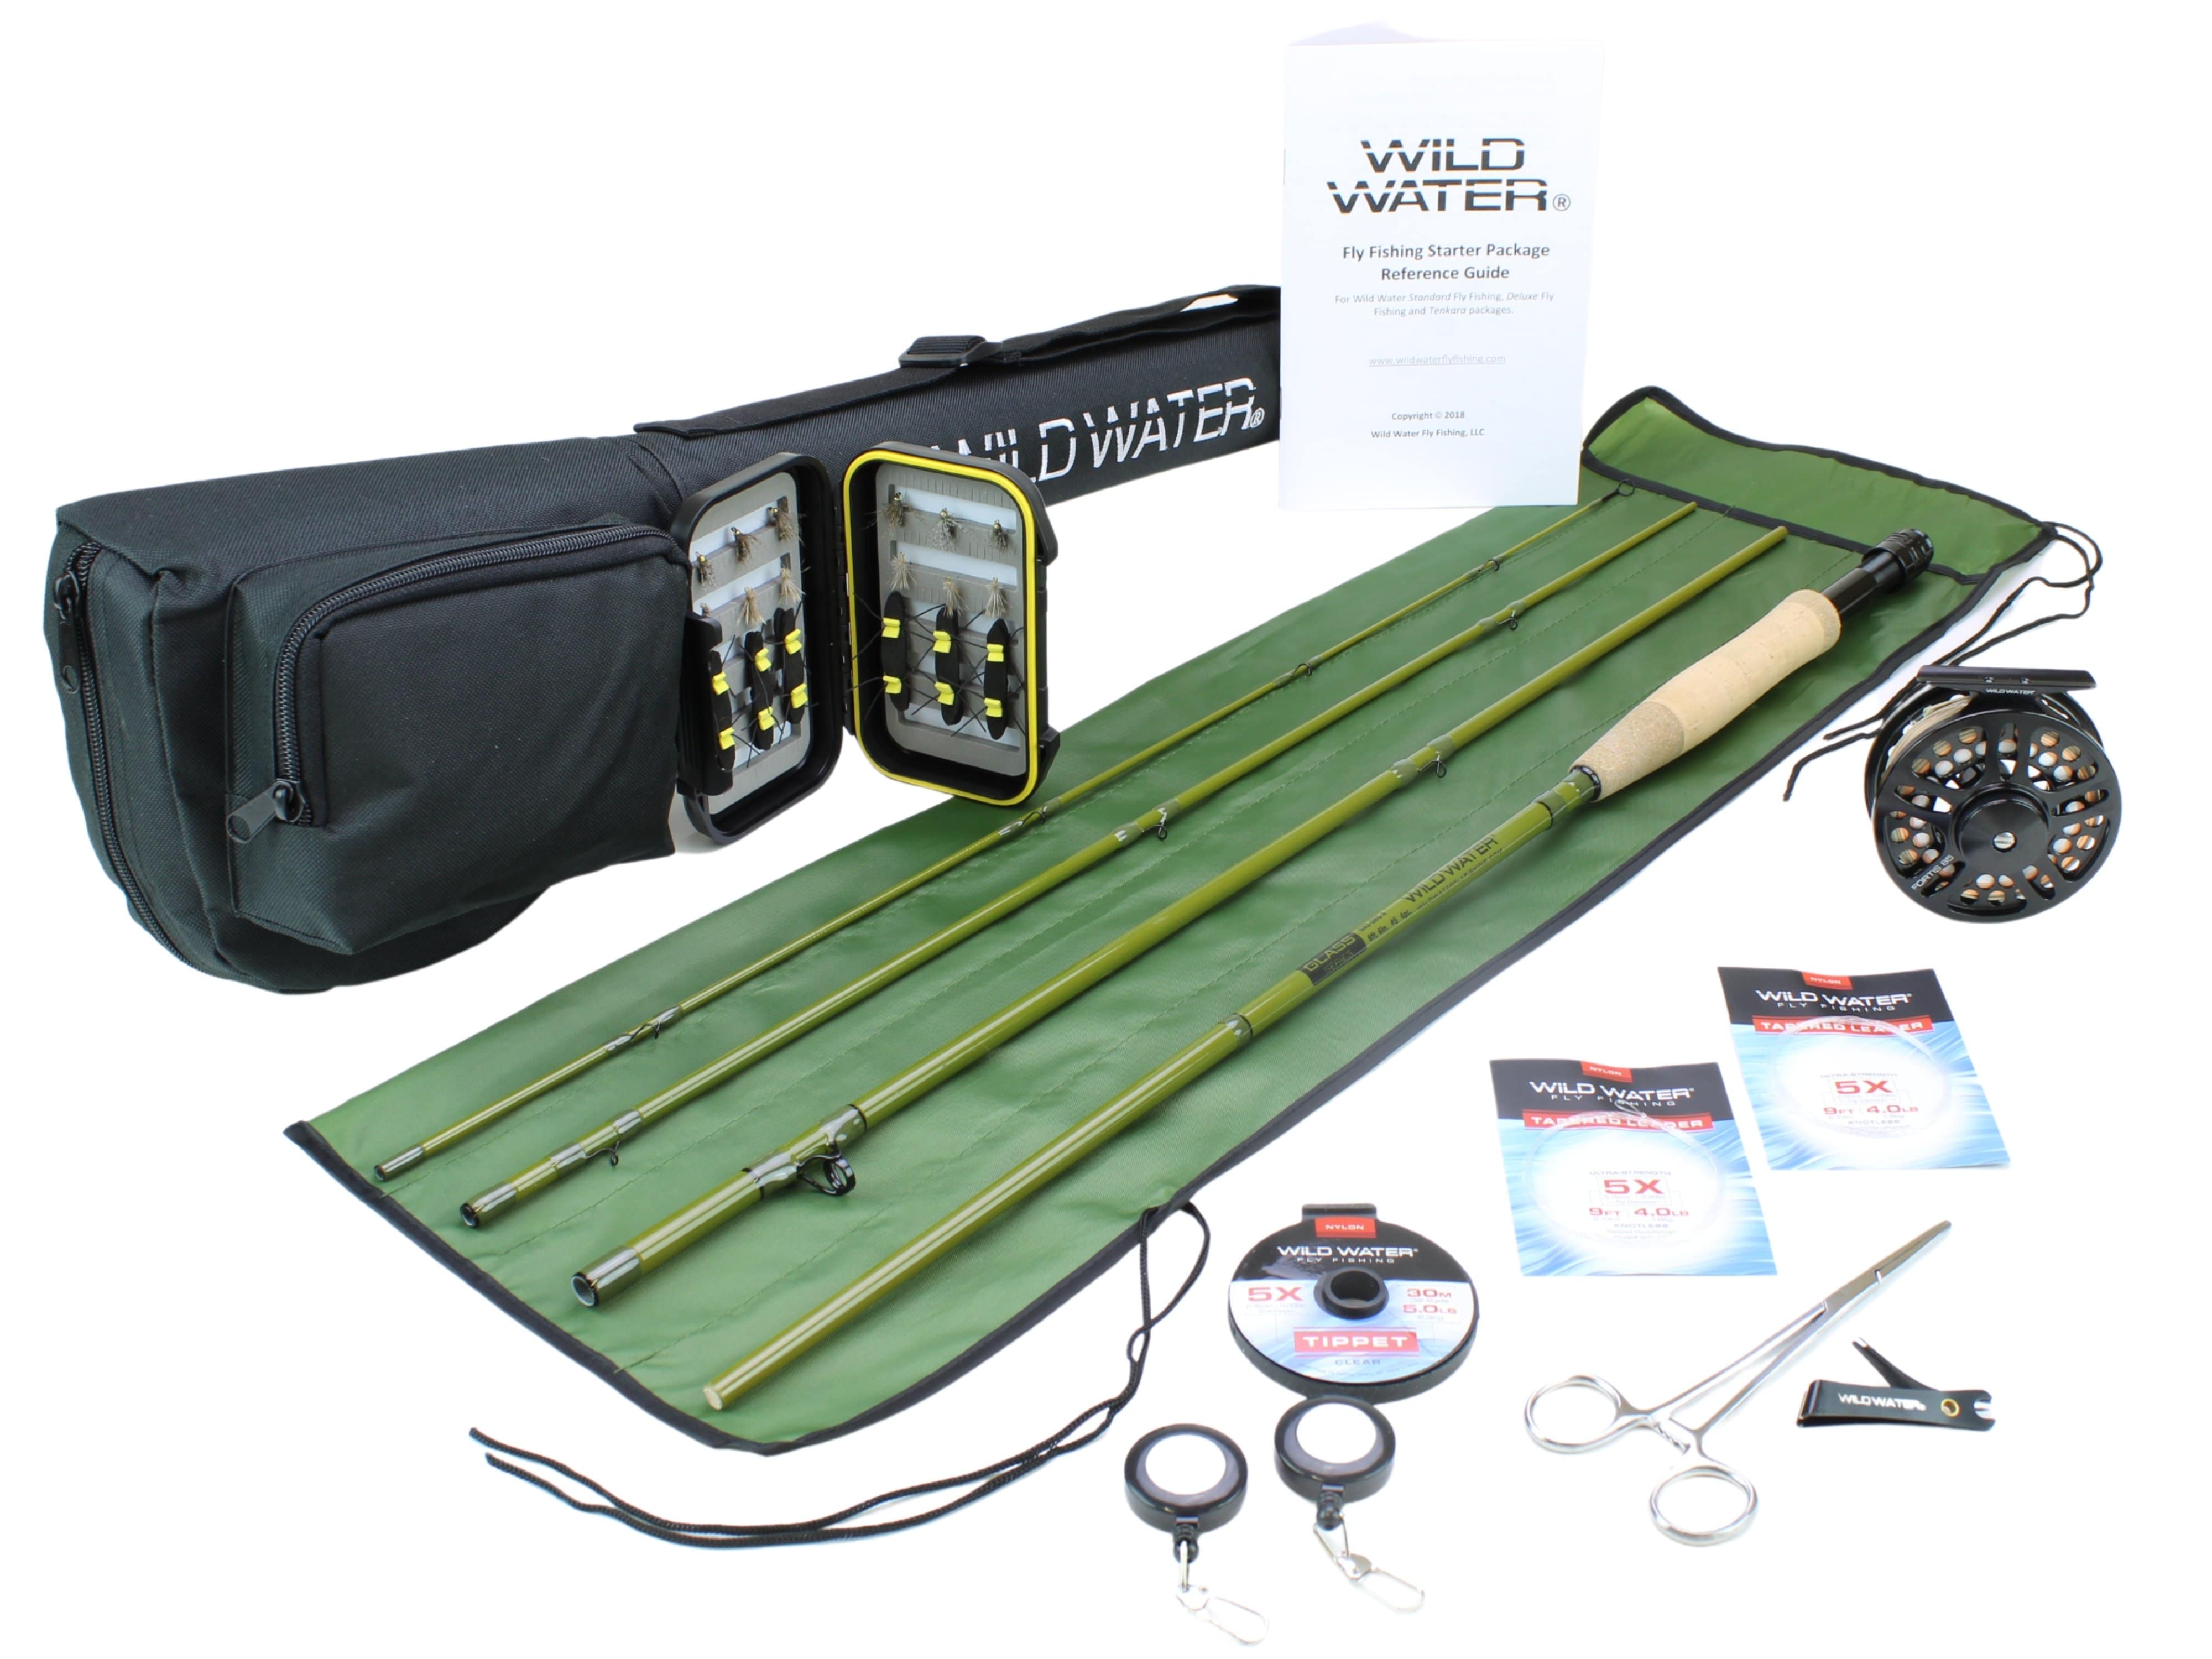 Wild Water Fly Fishing Combo with Fiberglass Rod 8 ft 6 in, 4-Piece, 5 wt